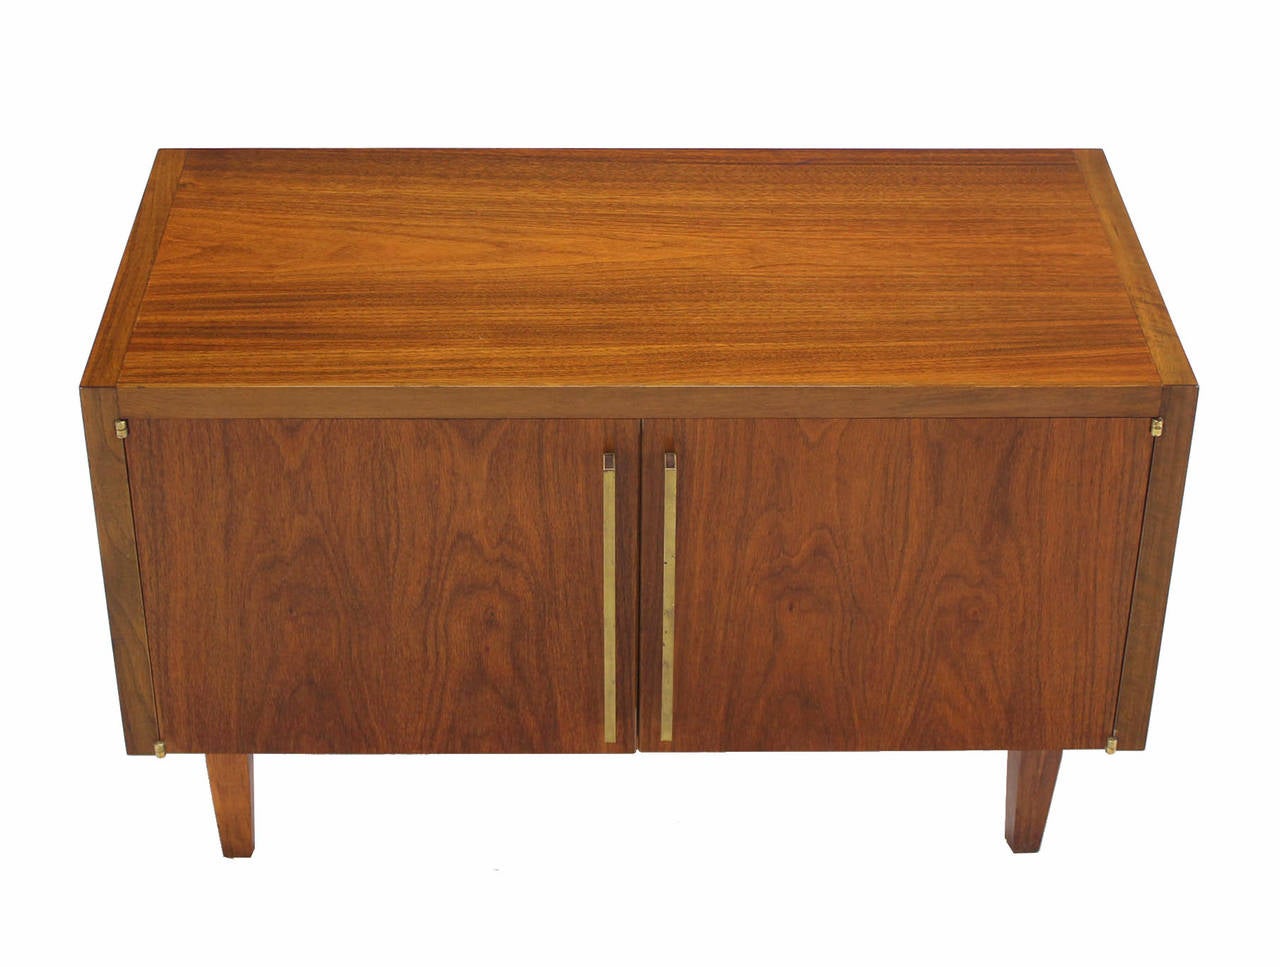 Very nice quality mid-century modern walnut two doors mini credenza with solid brass hardware.